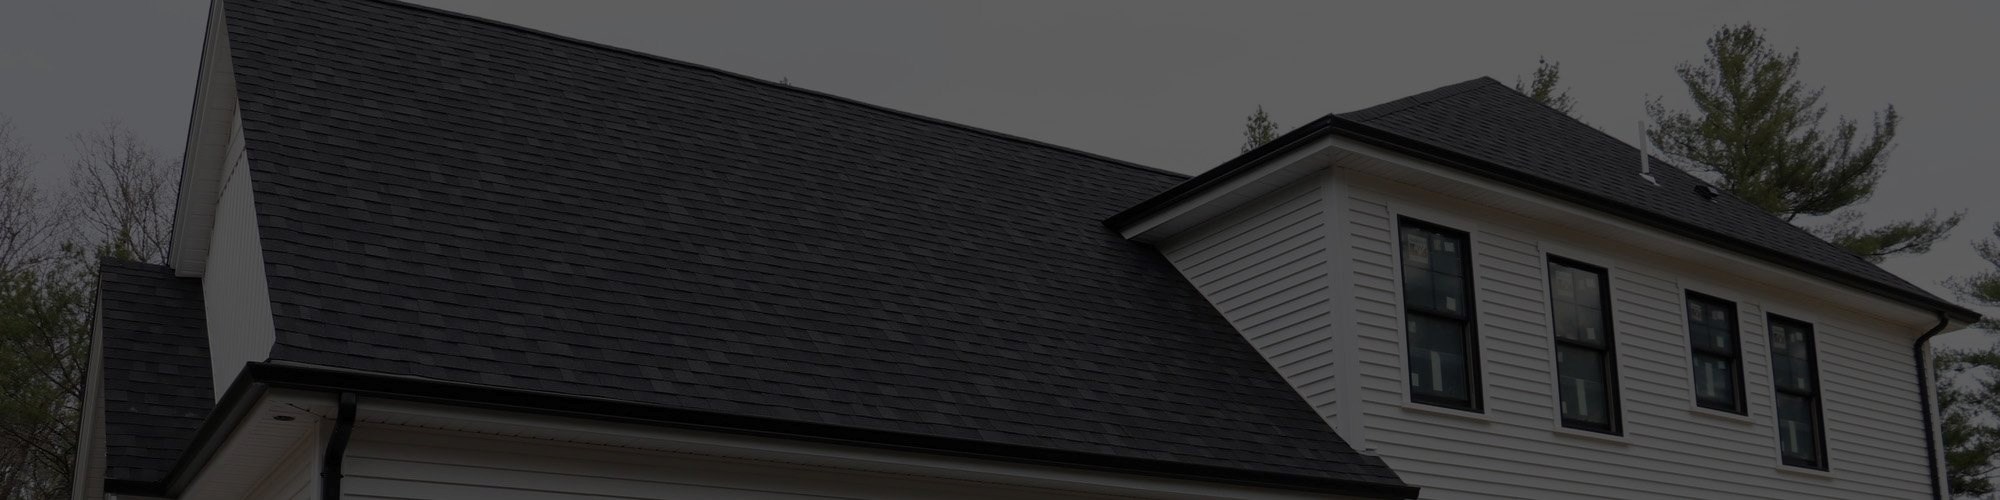 Cool roof shingles installed on mid-sized home in New Bedford, MA